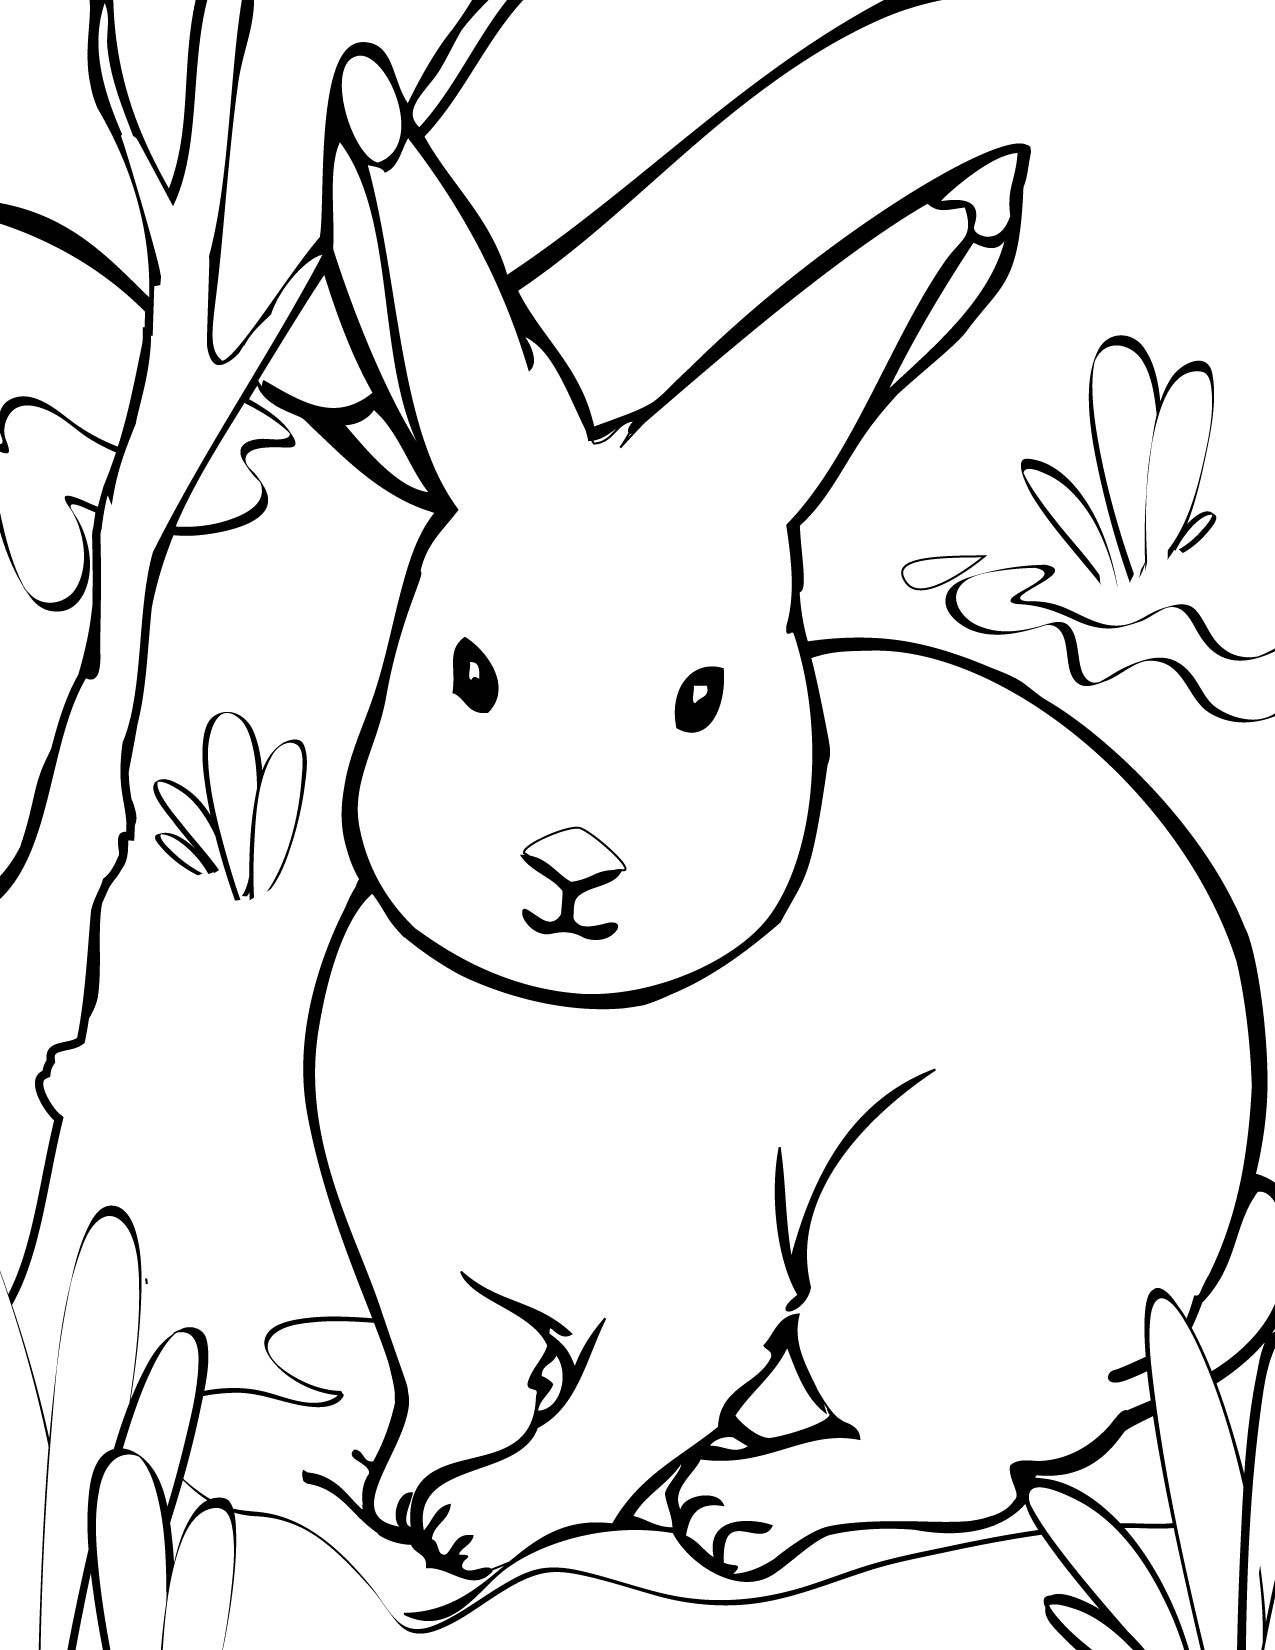 arctic-animals-coloring-pages-at-getcolorings-free-printable-colorings-pages-to-print-and